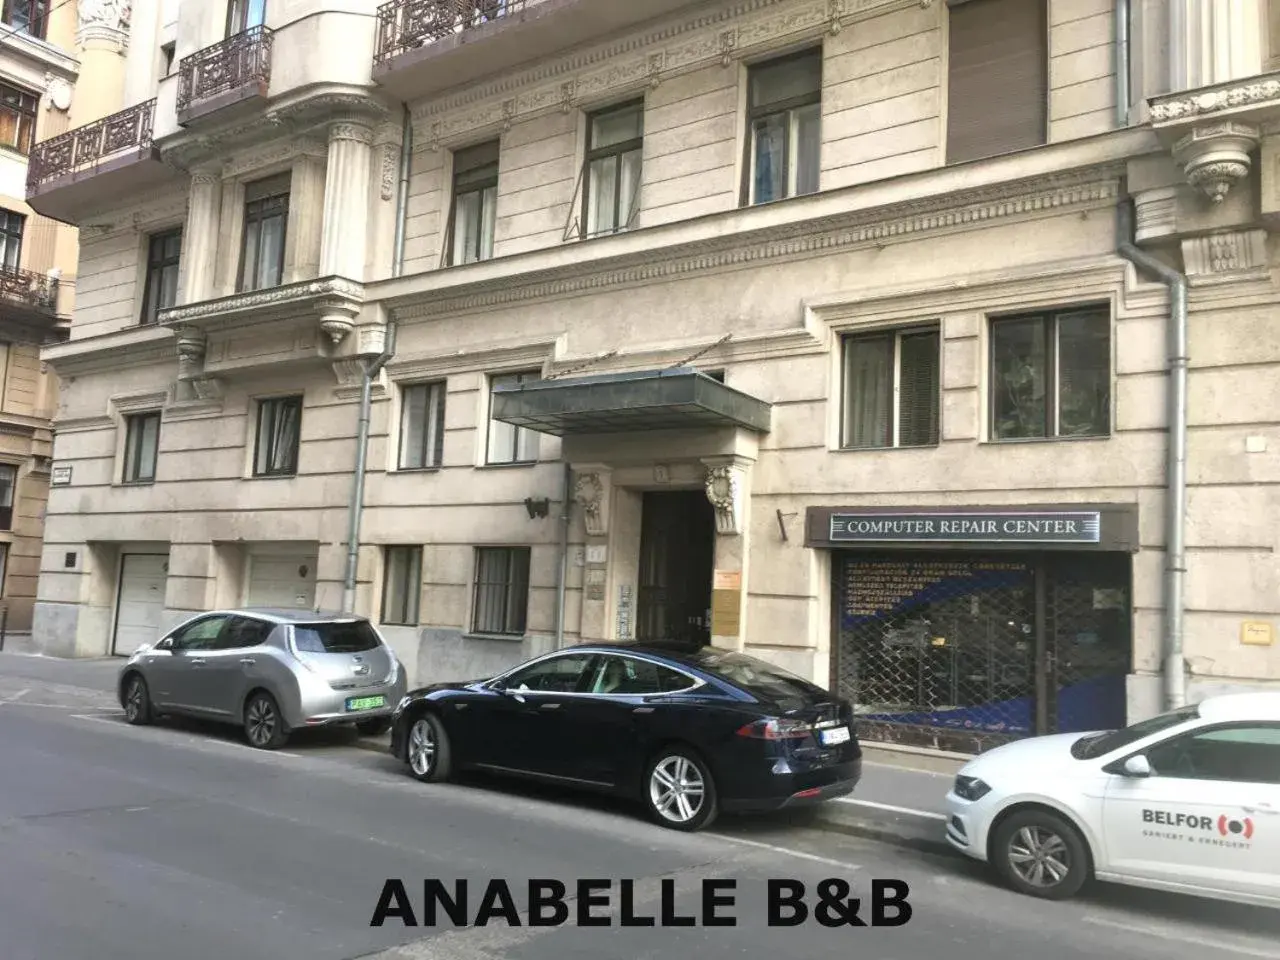 Street view, Property Building in Anabelle Bed and Breakfast